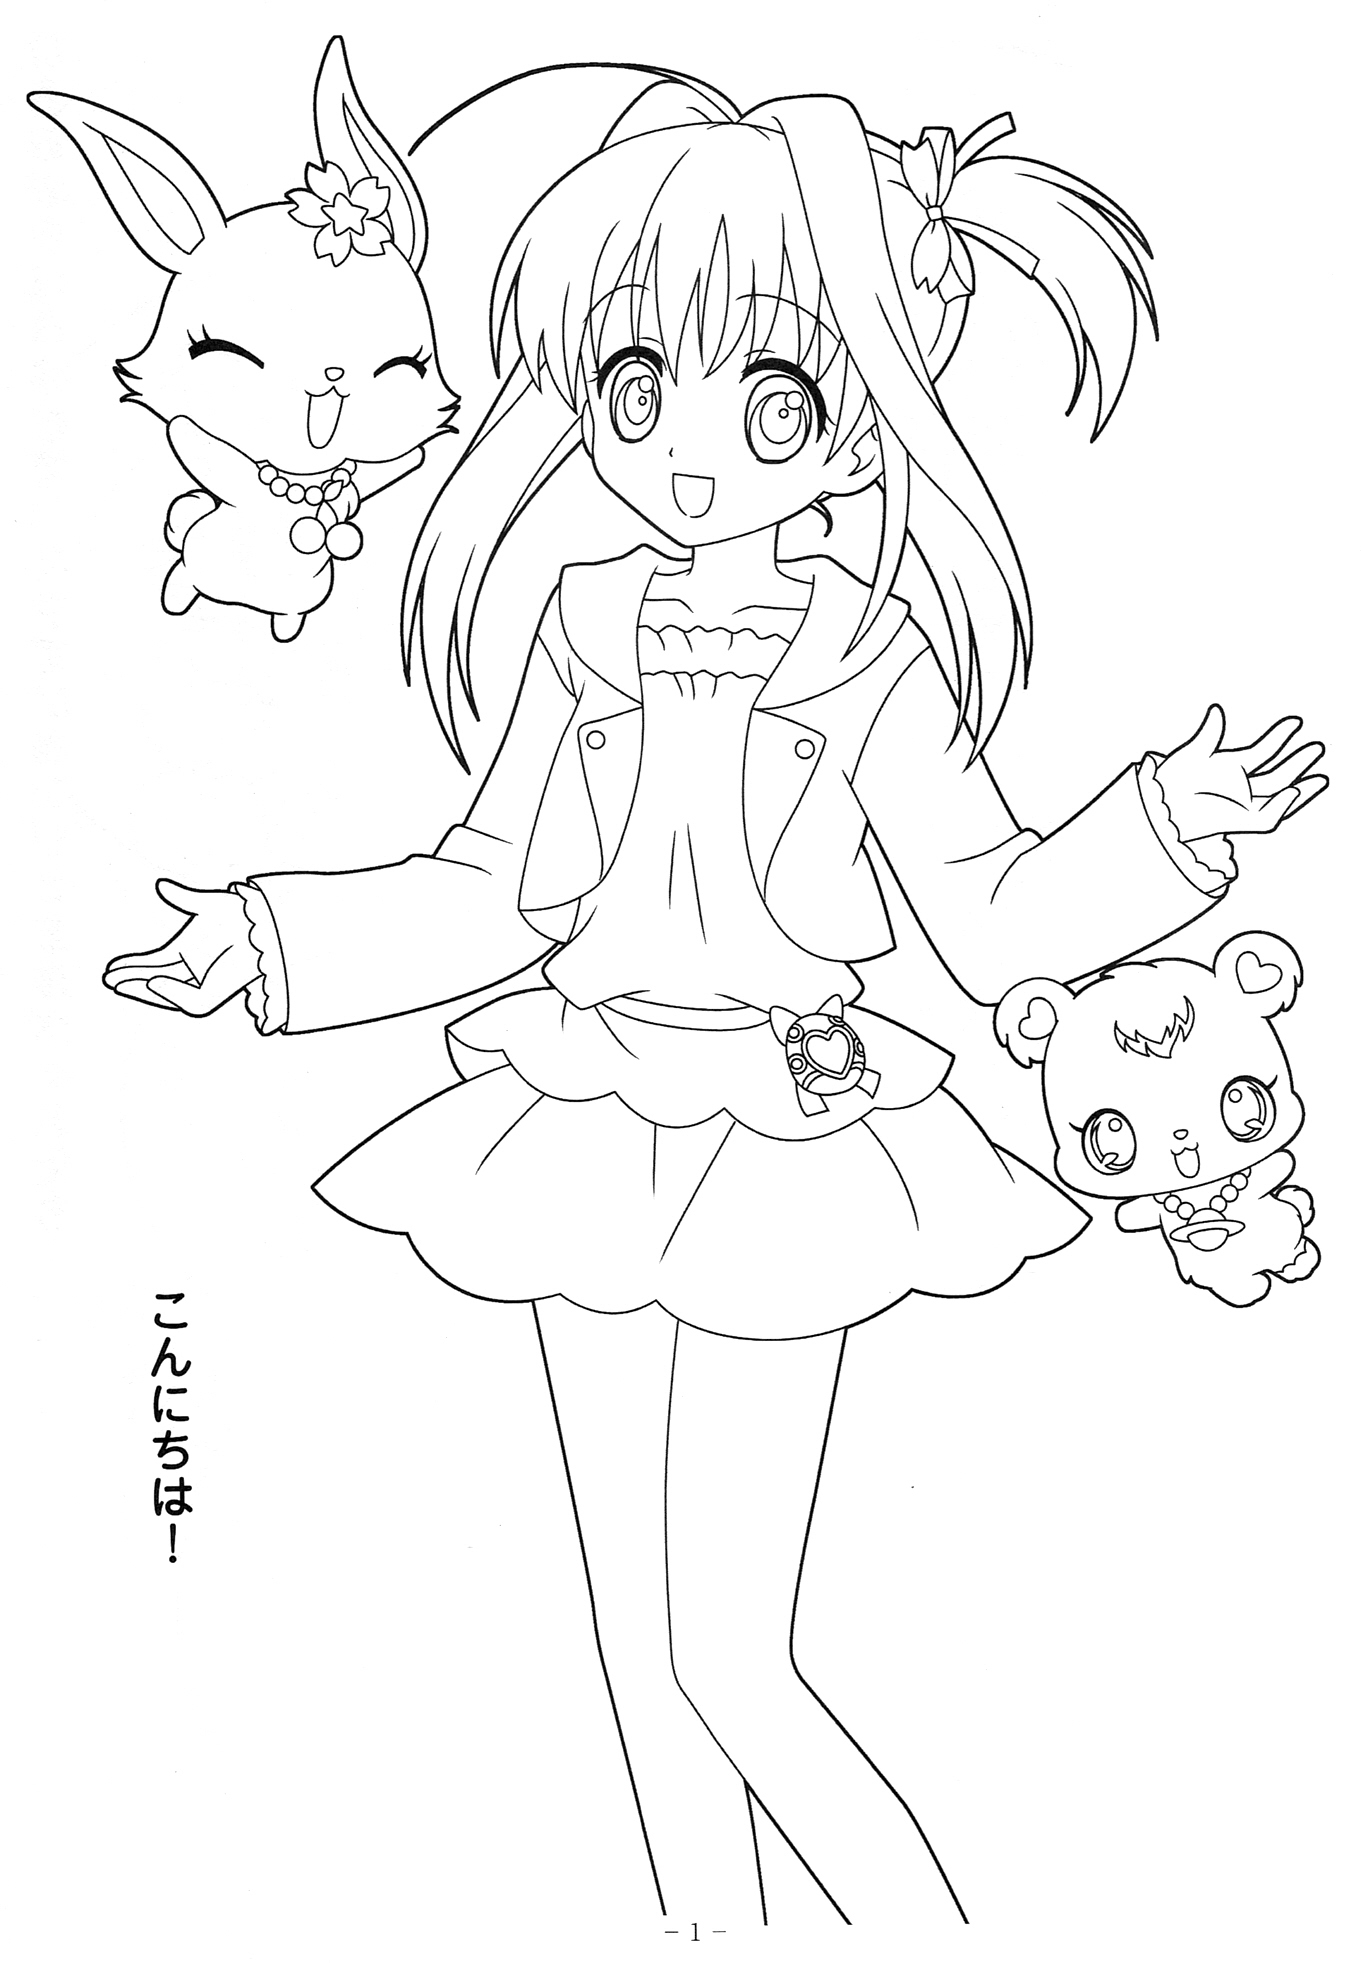 18 Jewelpet Coloring Pages - Free Printable Coloring Pages